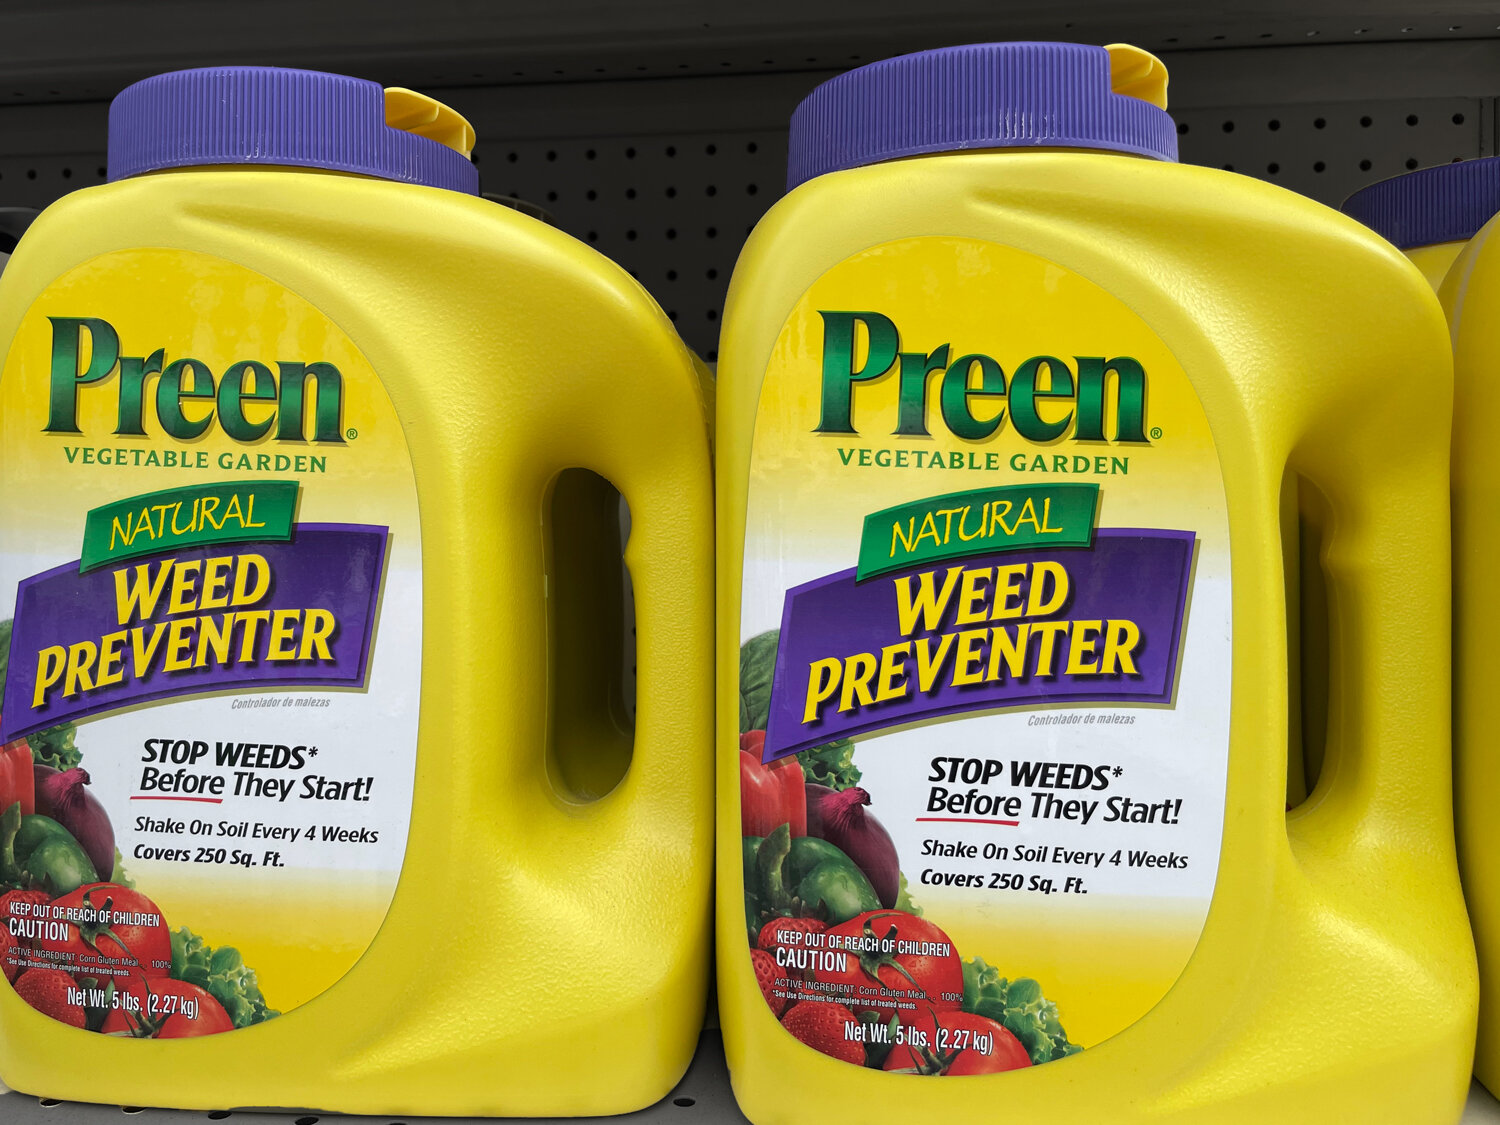 Preen Natural Weed Preventer